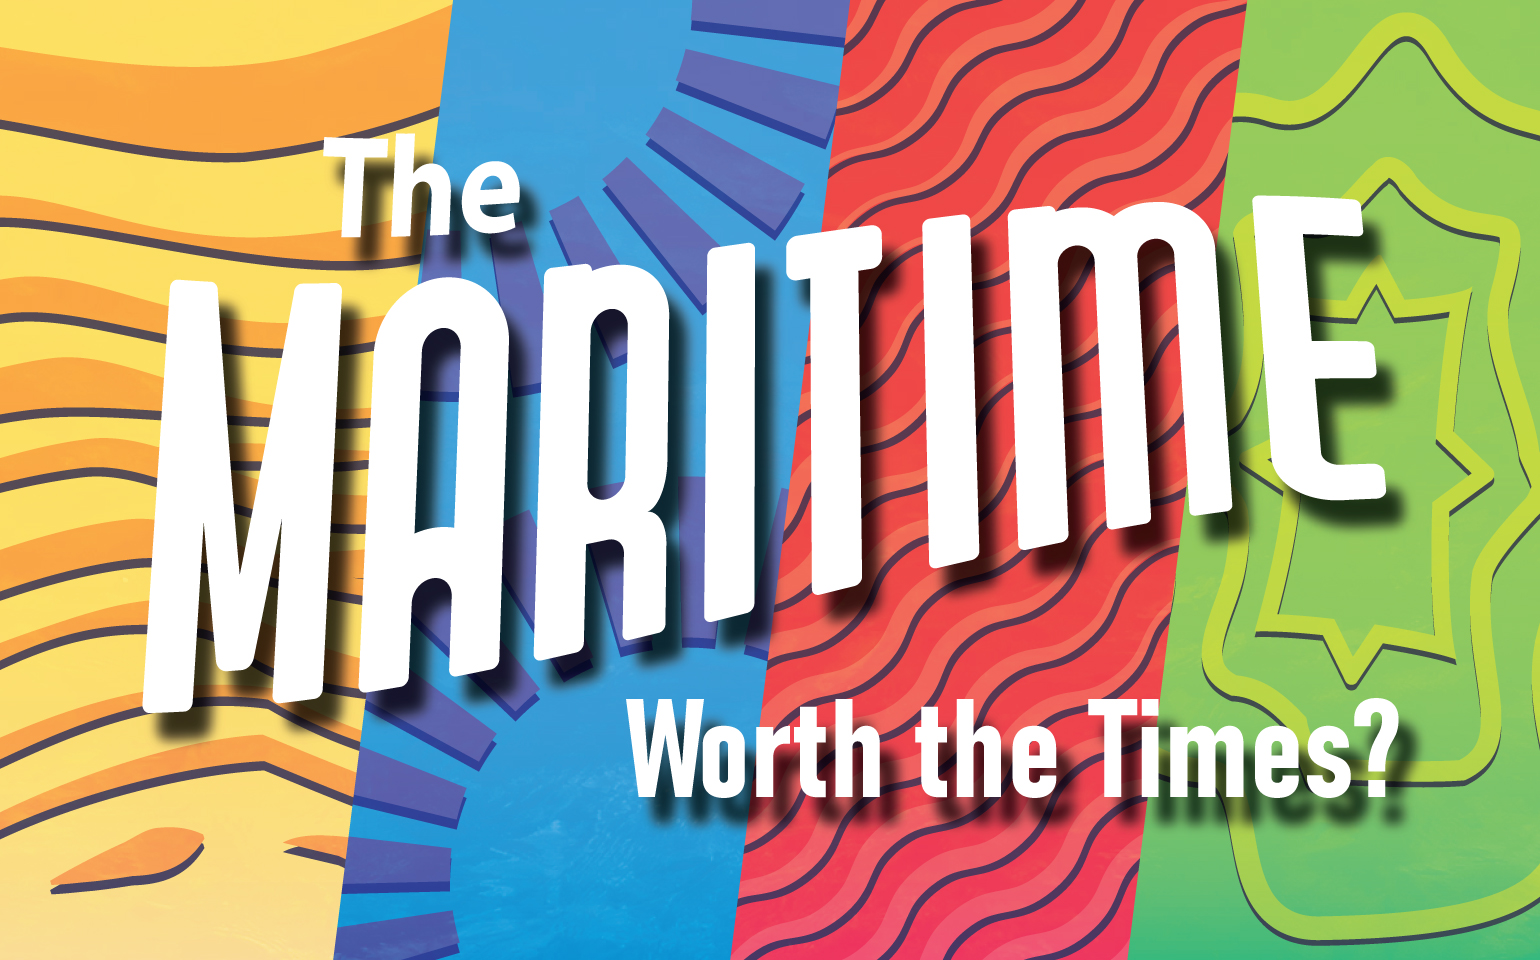 The Maritimes: Worth the Times? Is shown in graphic style.